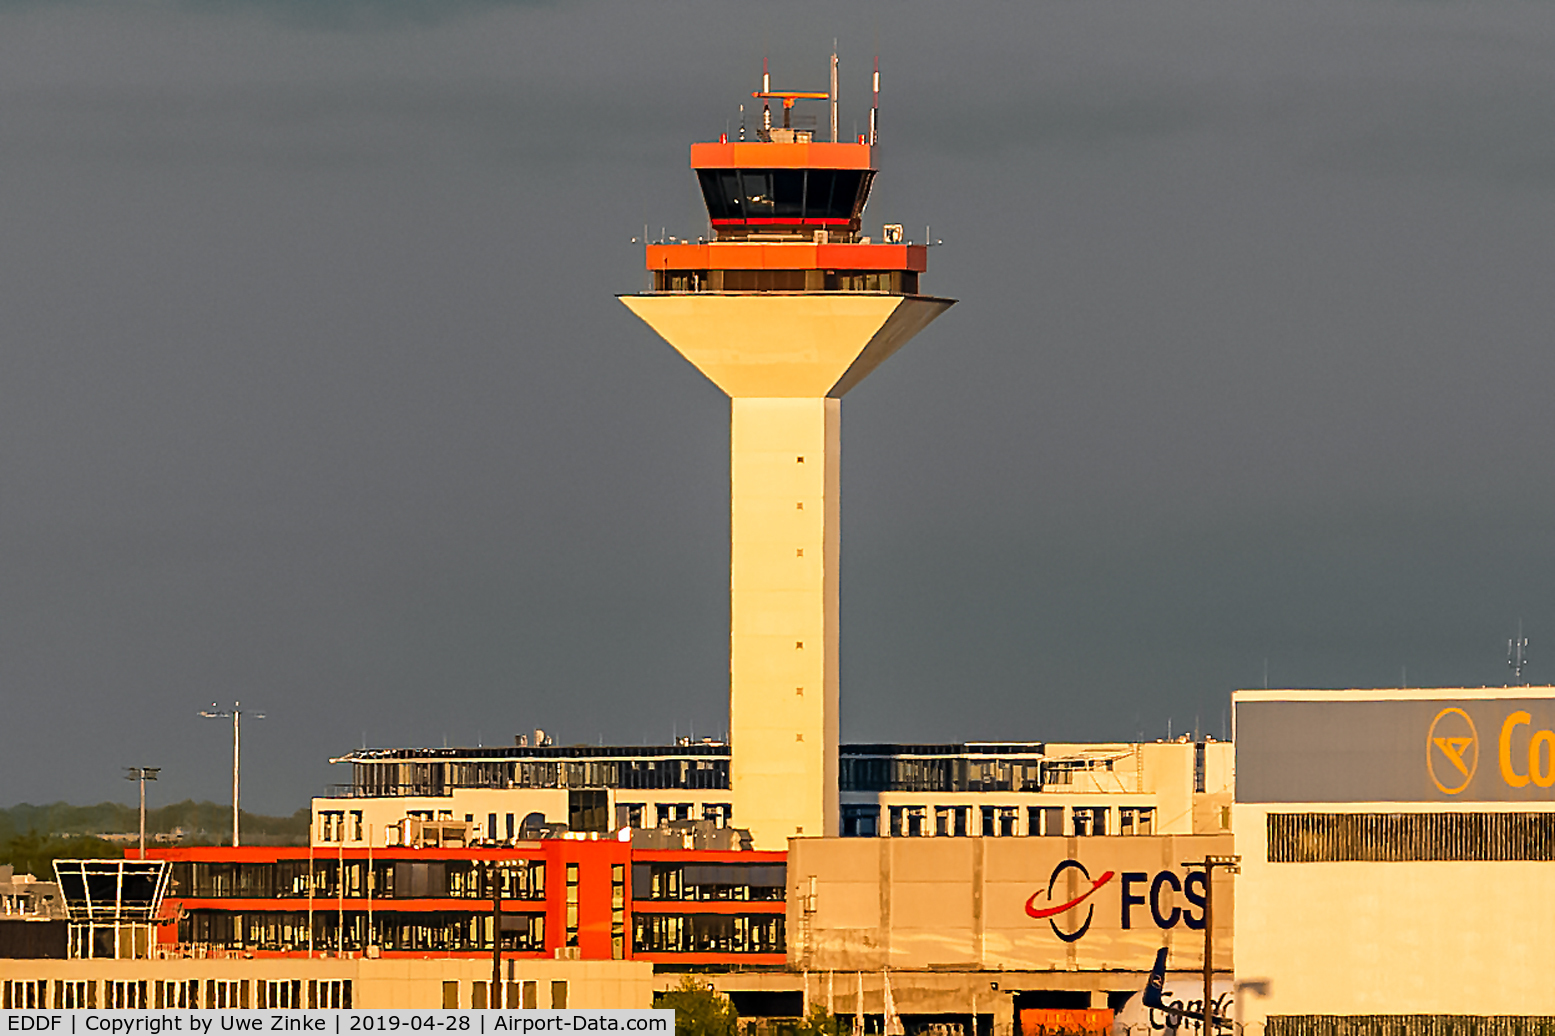 Frankfurt International Airport, Frankfurt am Main Germany (EDDF) - our backup tower here.
Frankfurt is the one and only airport with a complete backup tower!!